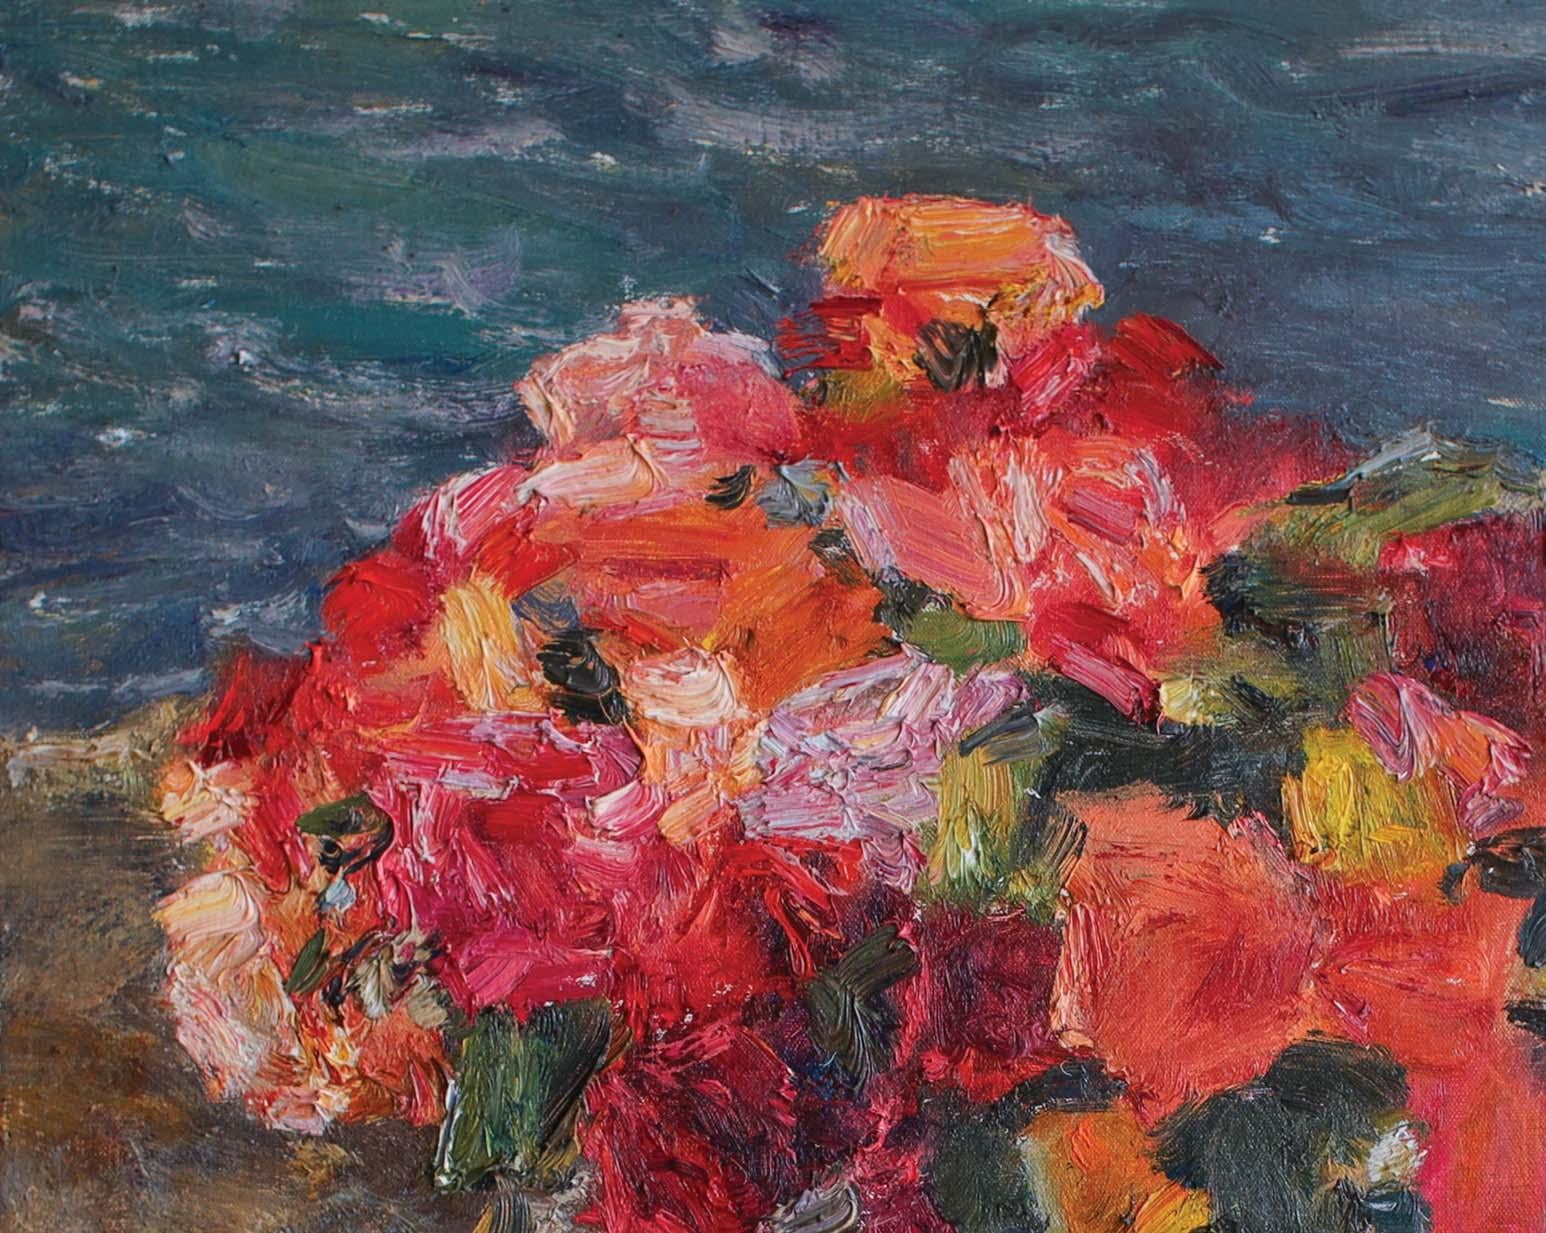 Roses on the Shore - Impressionist Painting by Roman Konstantinov